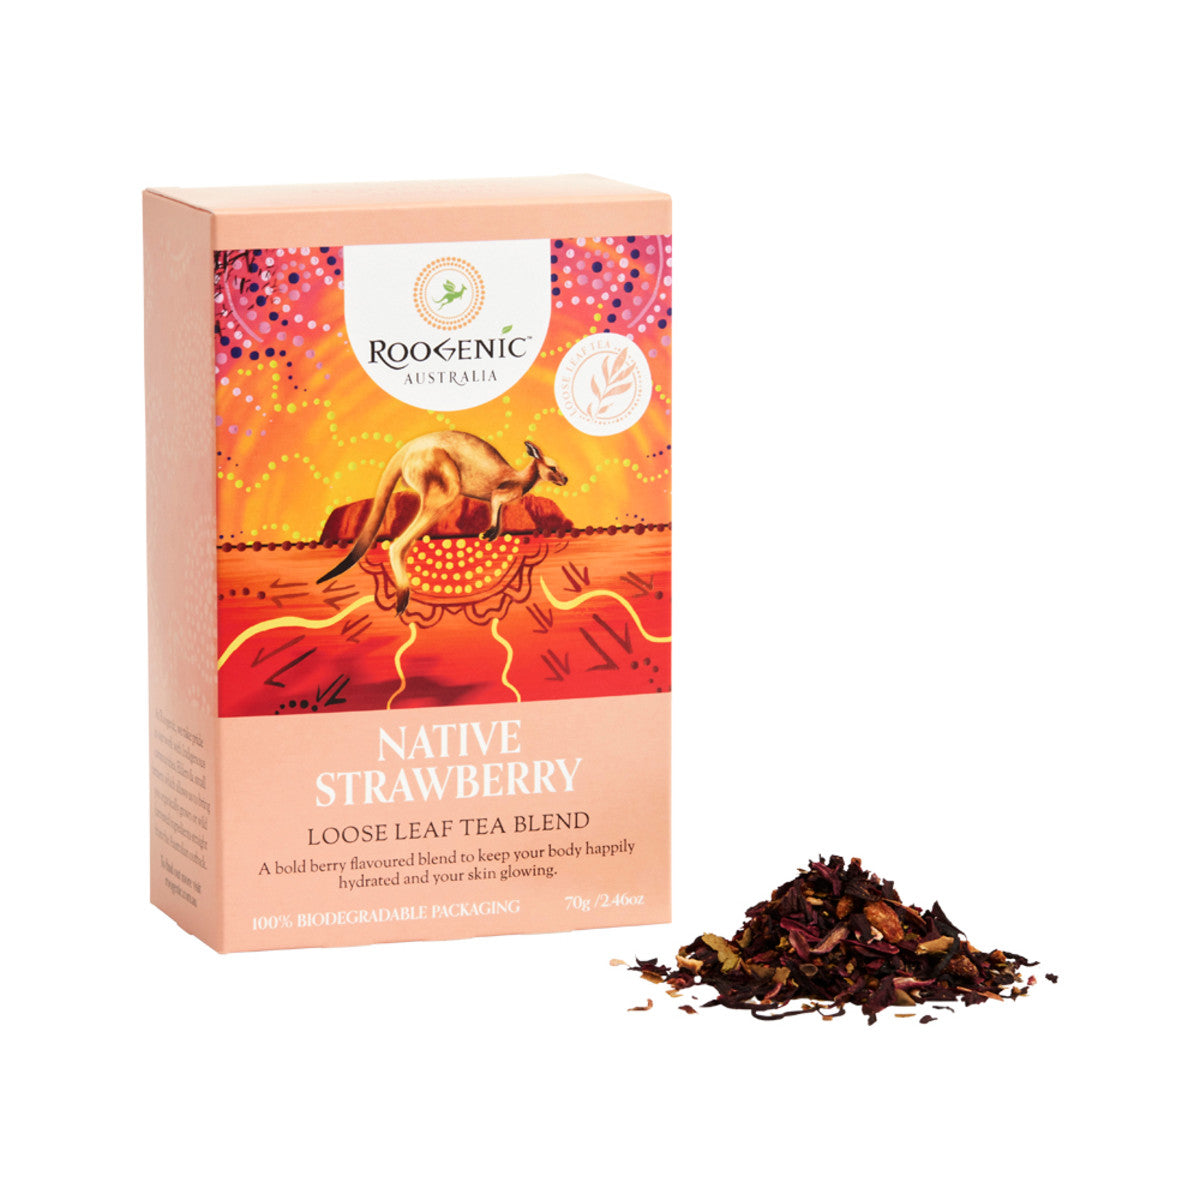 Roogenic Native Strawberry Loose Leaf 70g